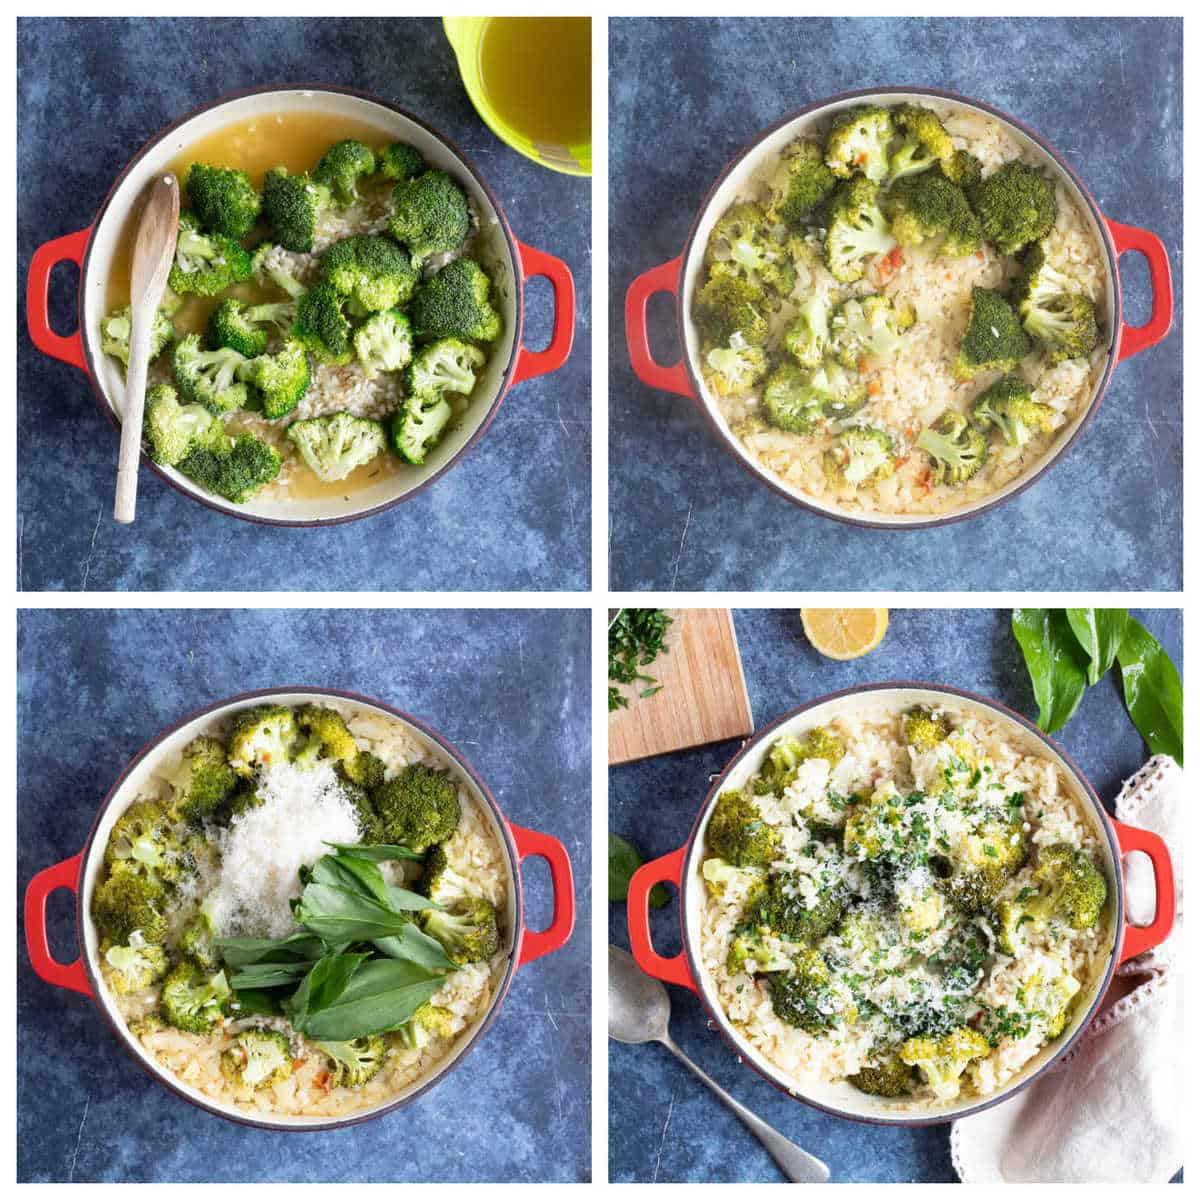 Step by step photo instructions for making oven baked wild garlic risotto.